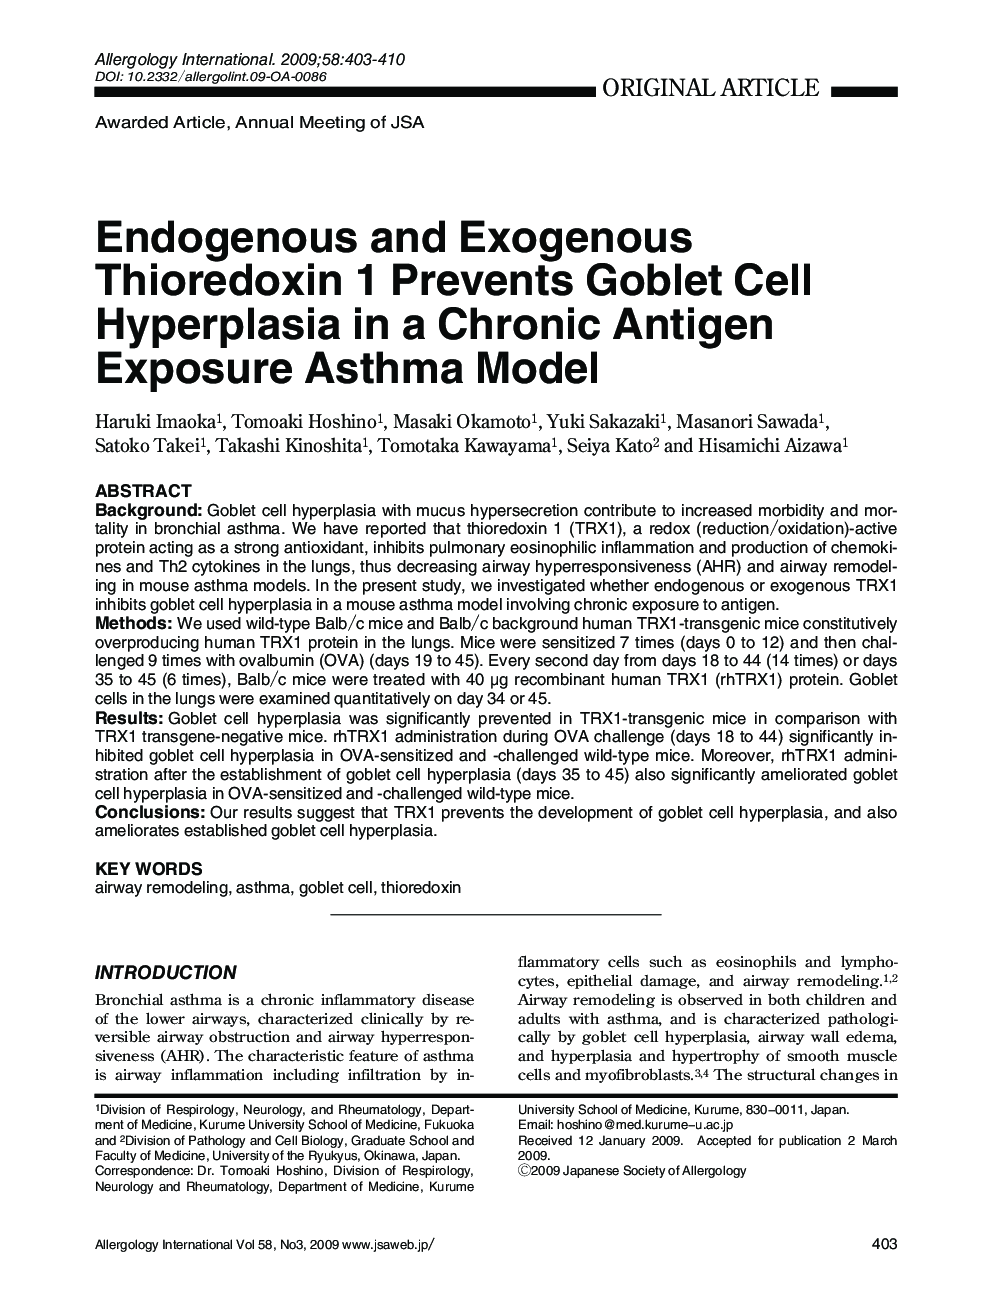 Endogenous and Exogenous Thioredoxin 1 Prevents Goblet Cell Hyperplasia in a Chronic Antigen Exposure Asthma Model 